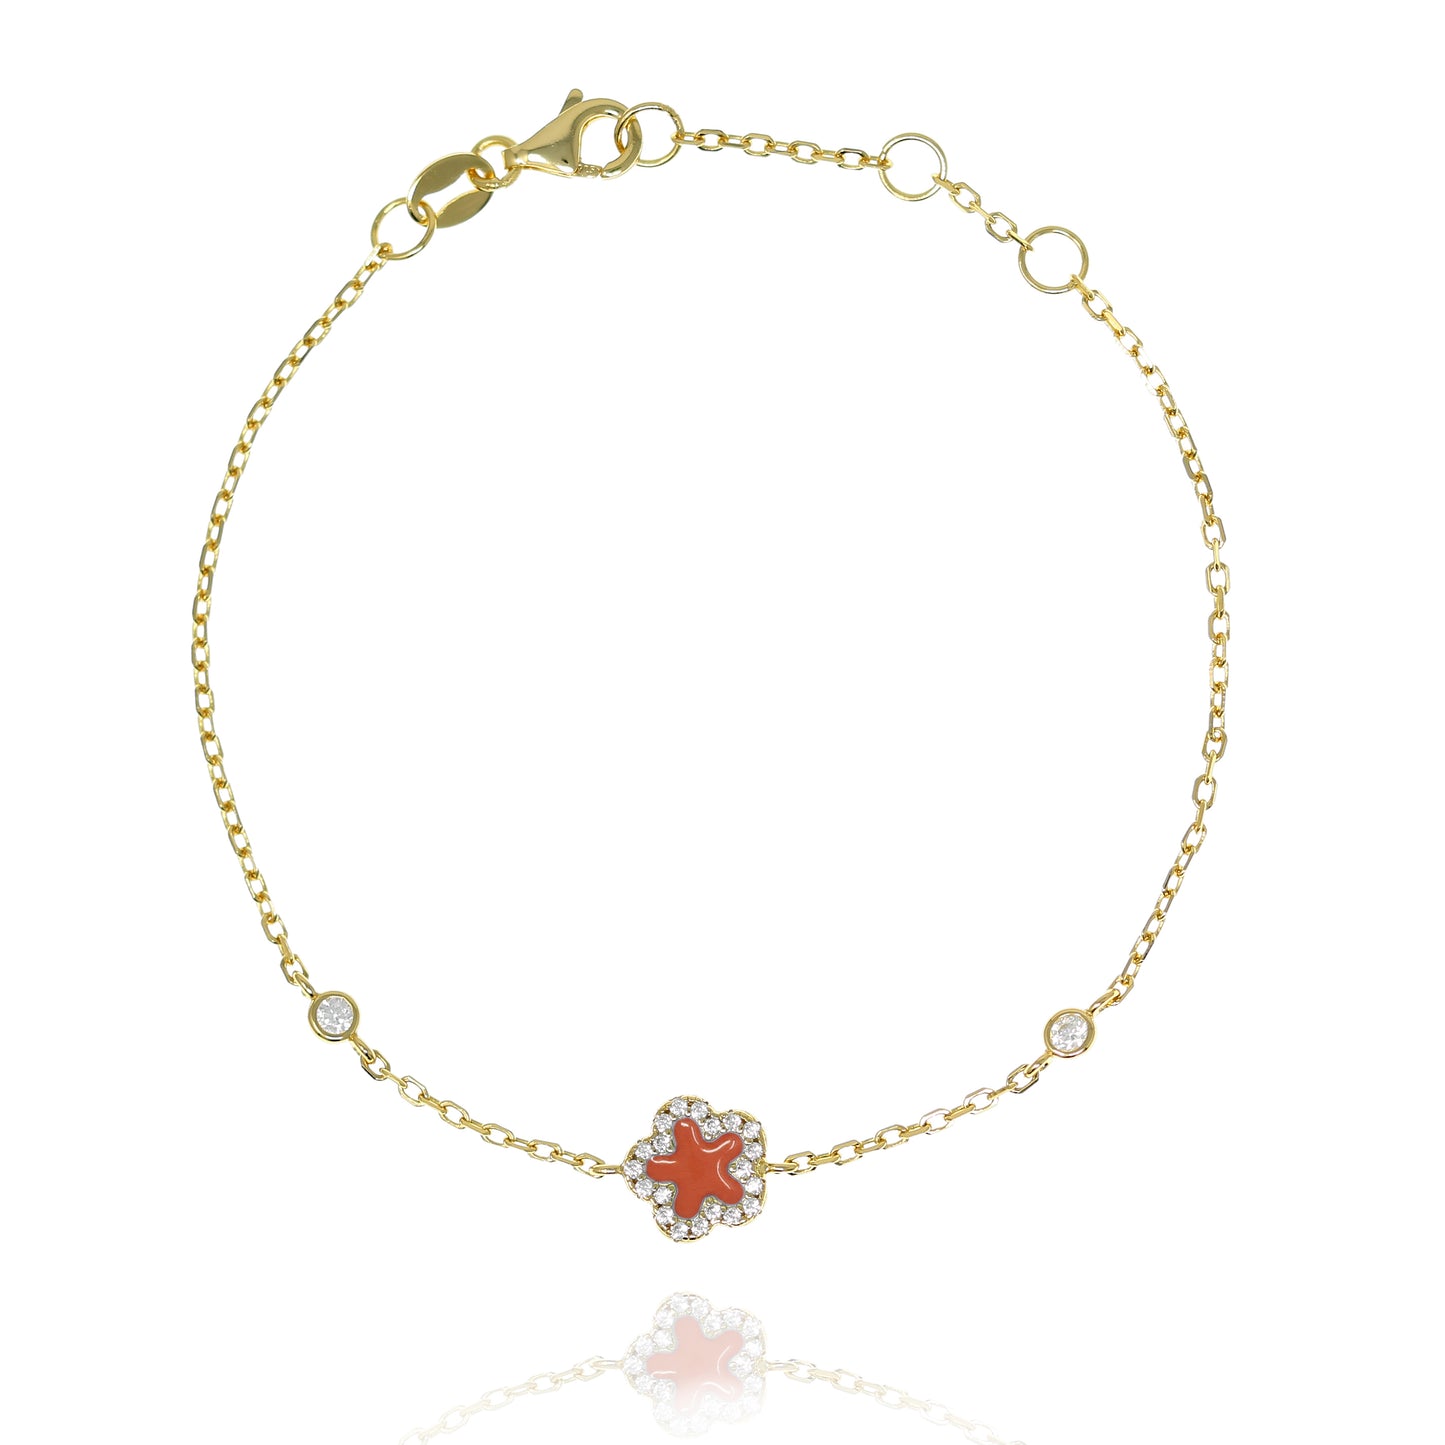 BF-20/GR - Chain Bracelet with Red Star